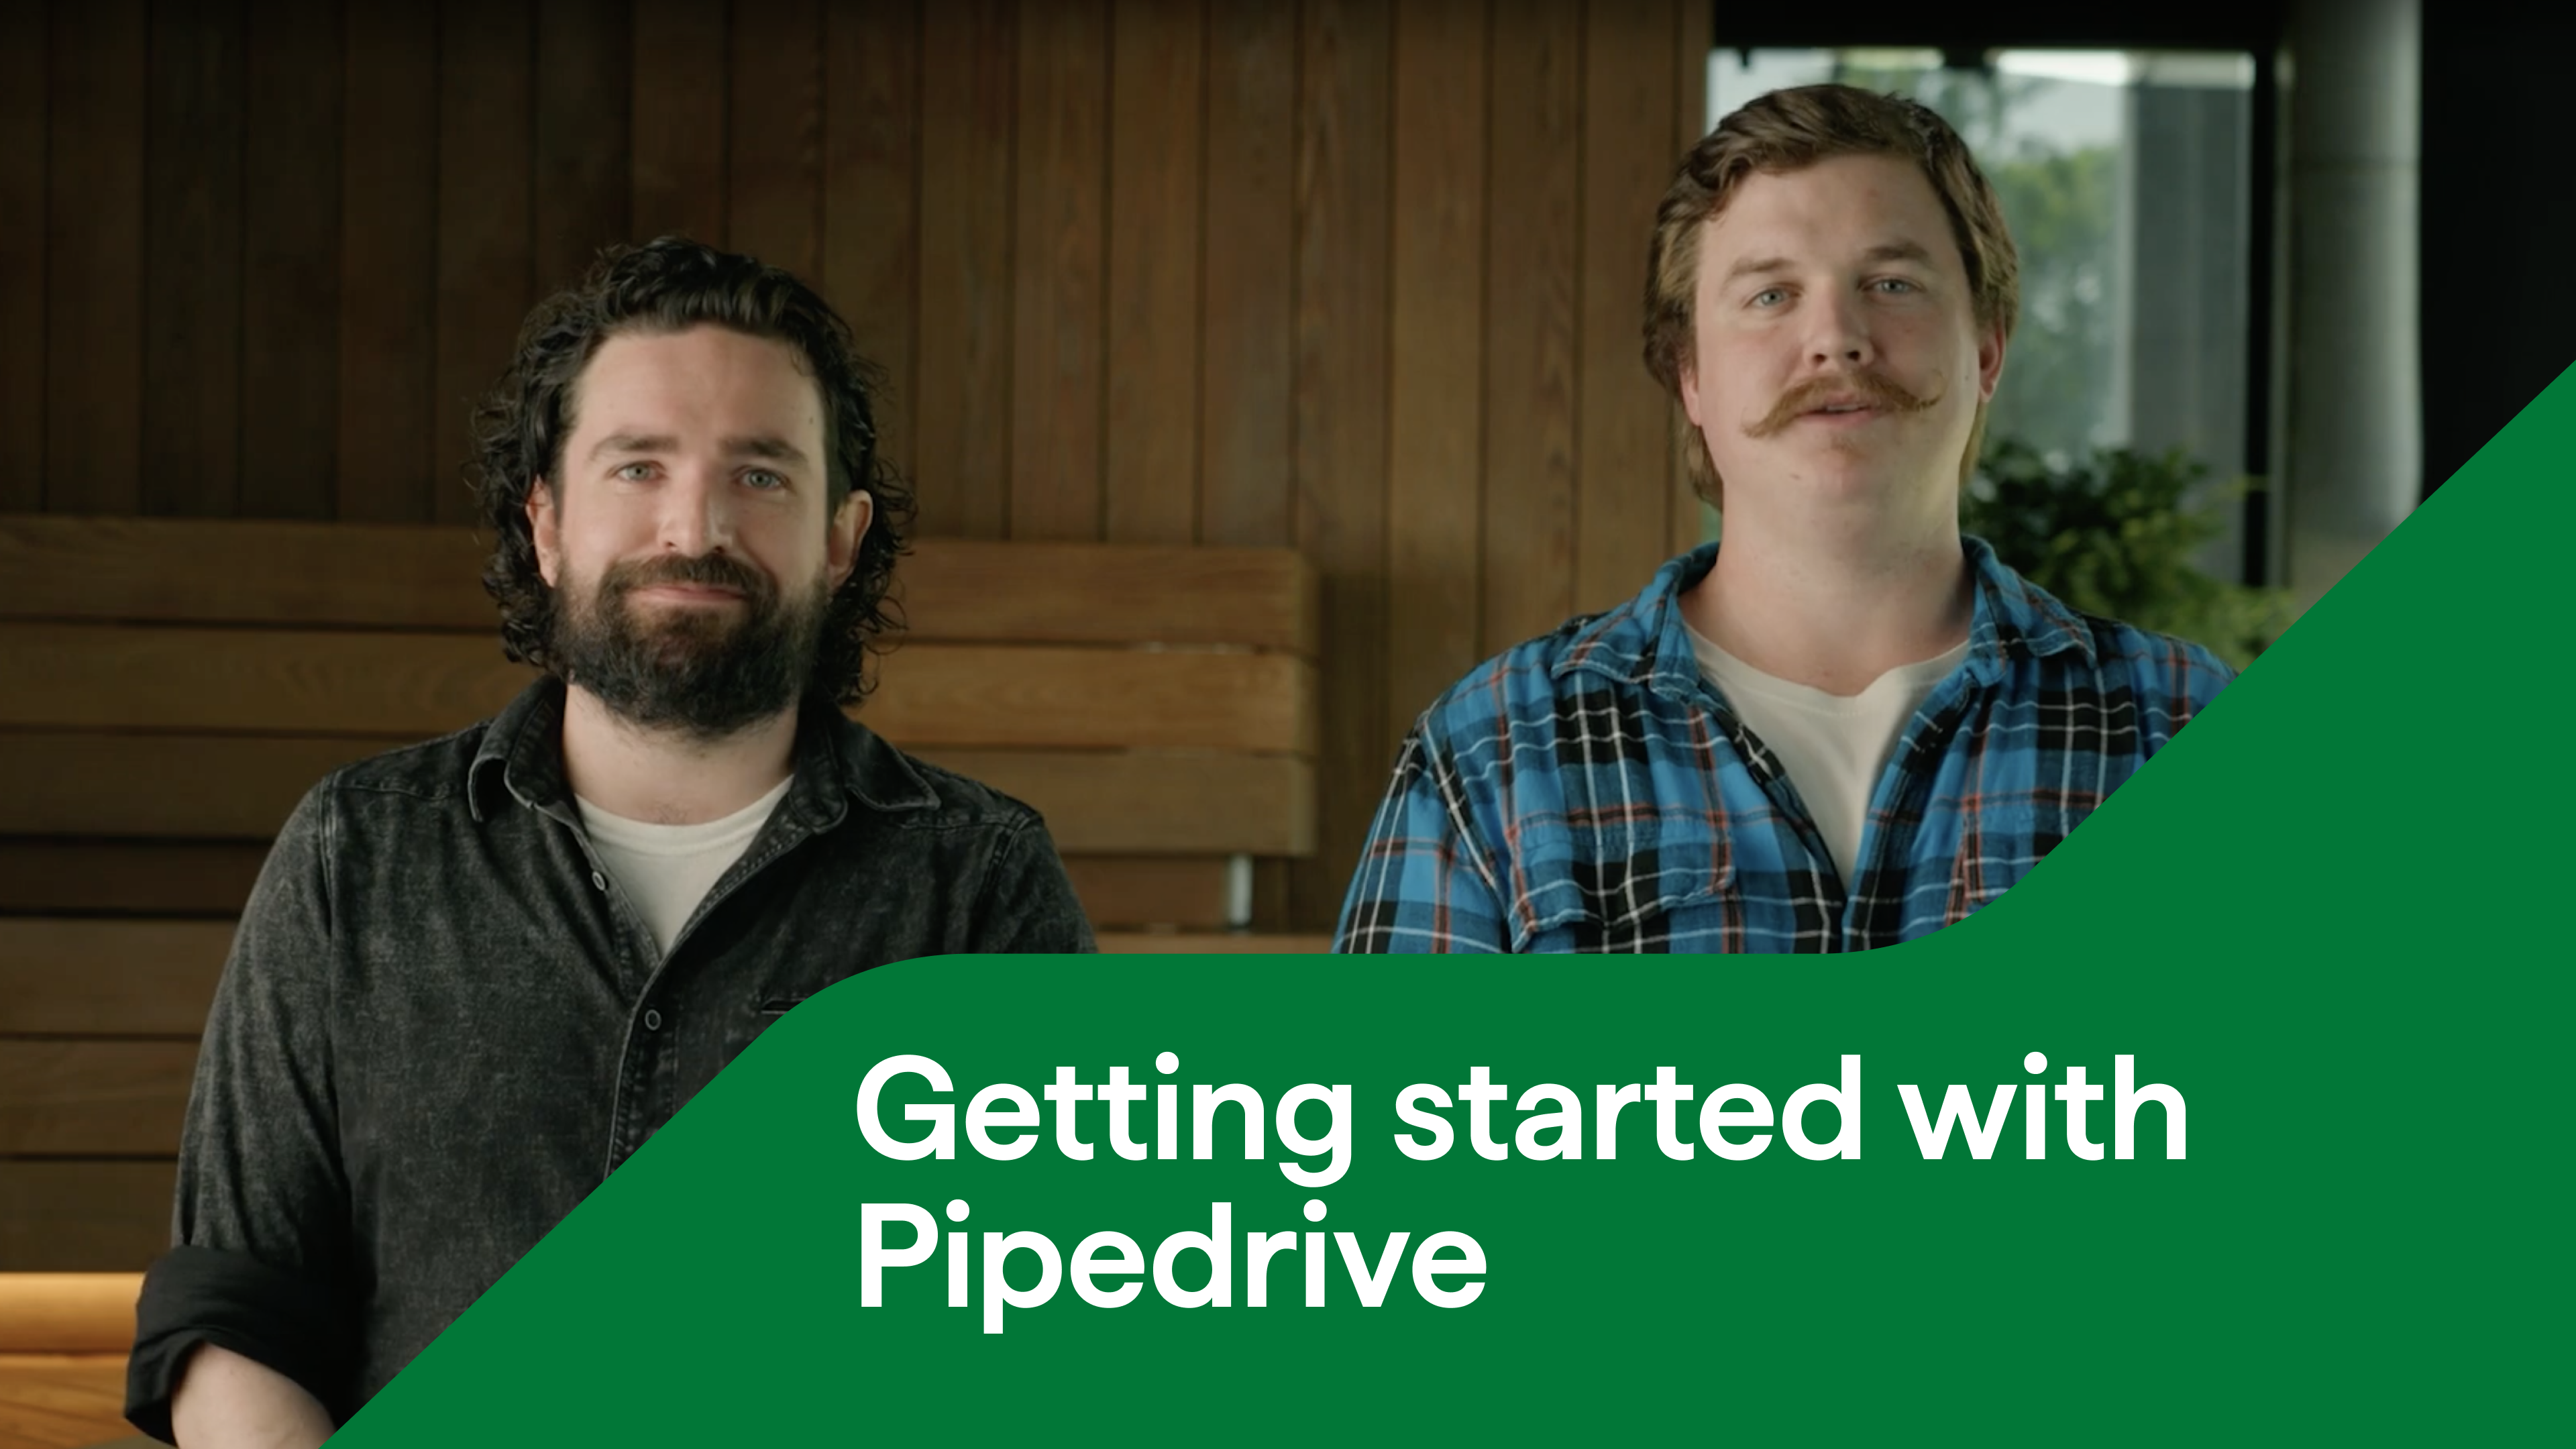 Welcome to the “Getting started with Pipedrive” course